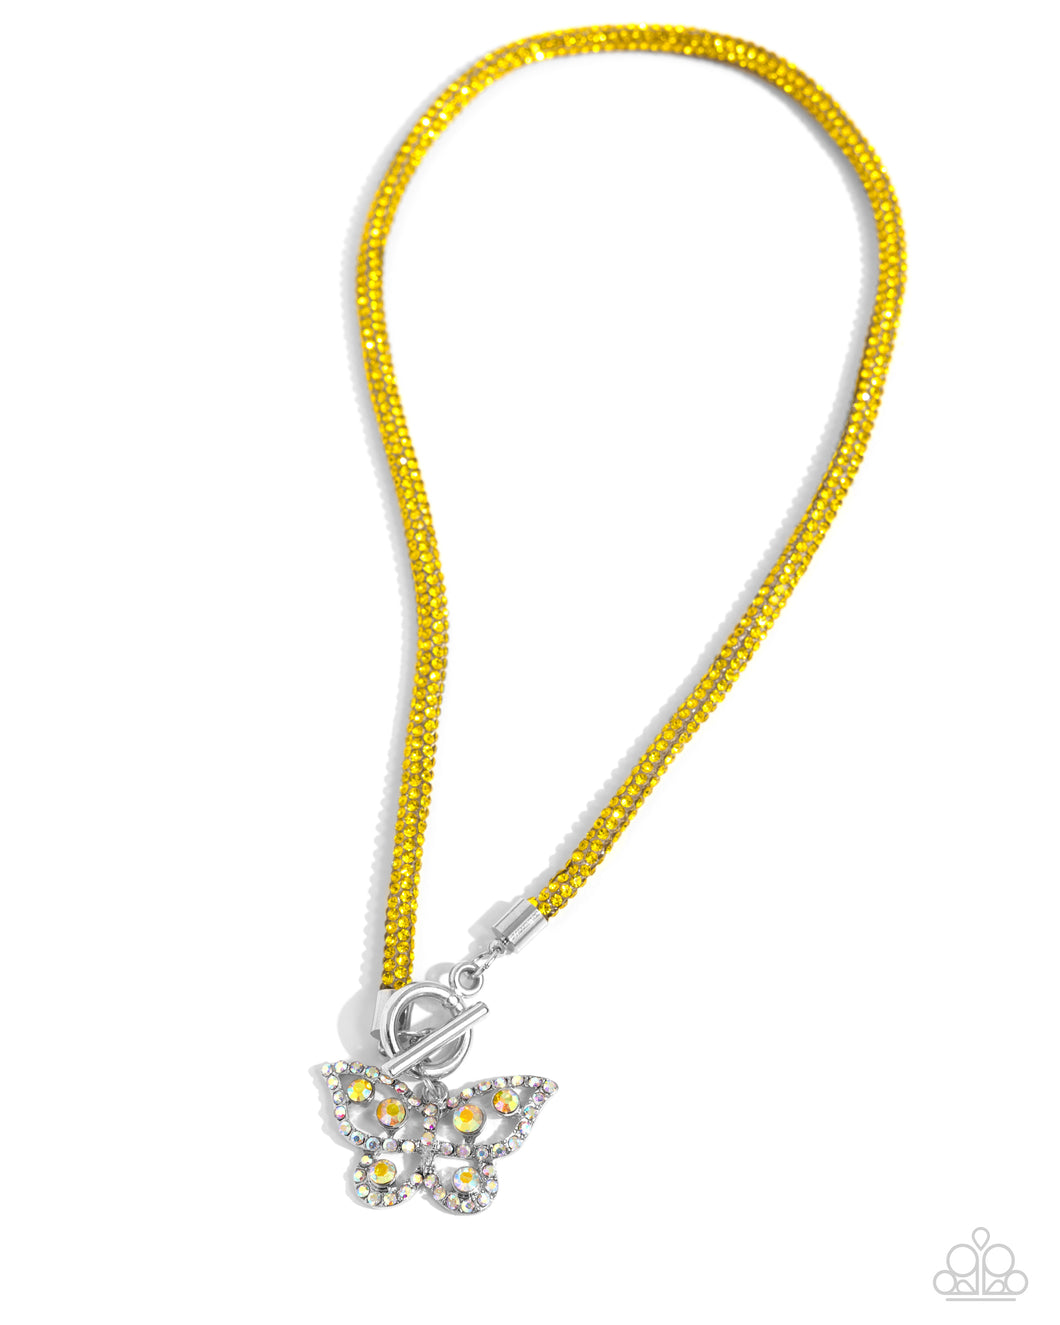 On SHIMMERING Wings - Yellow Necklace